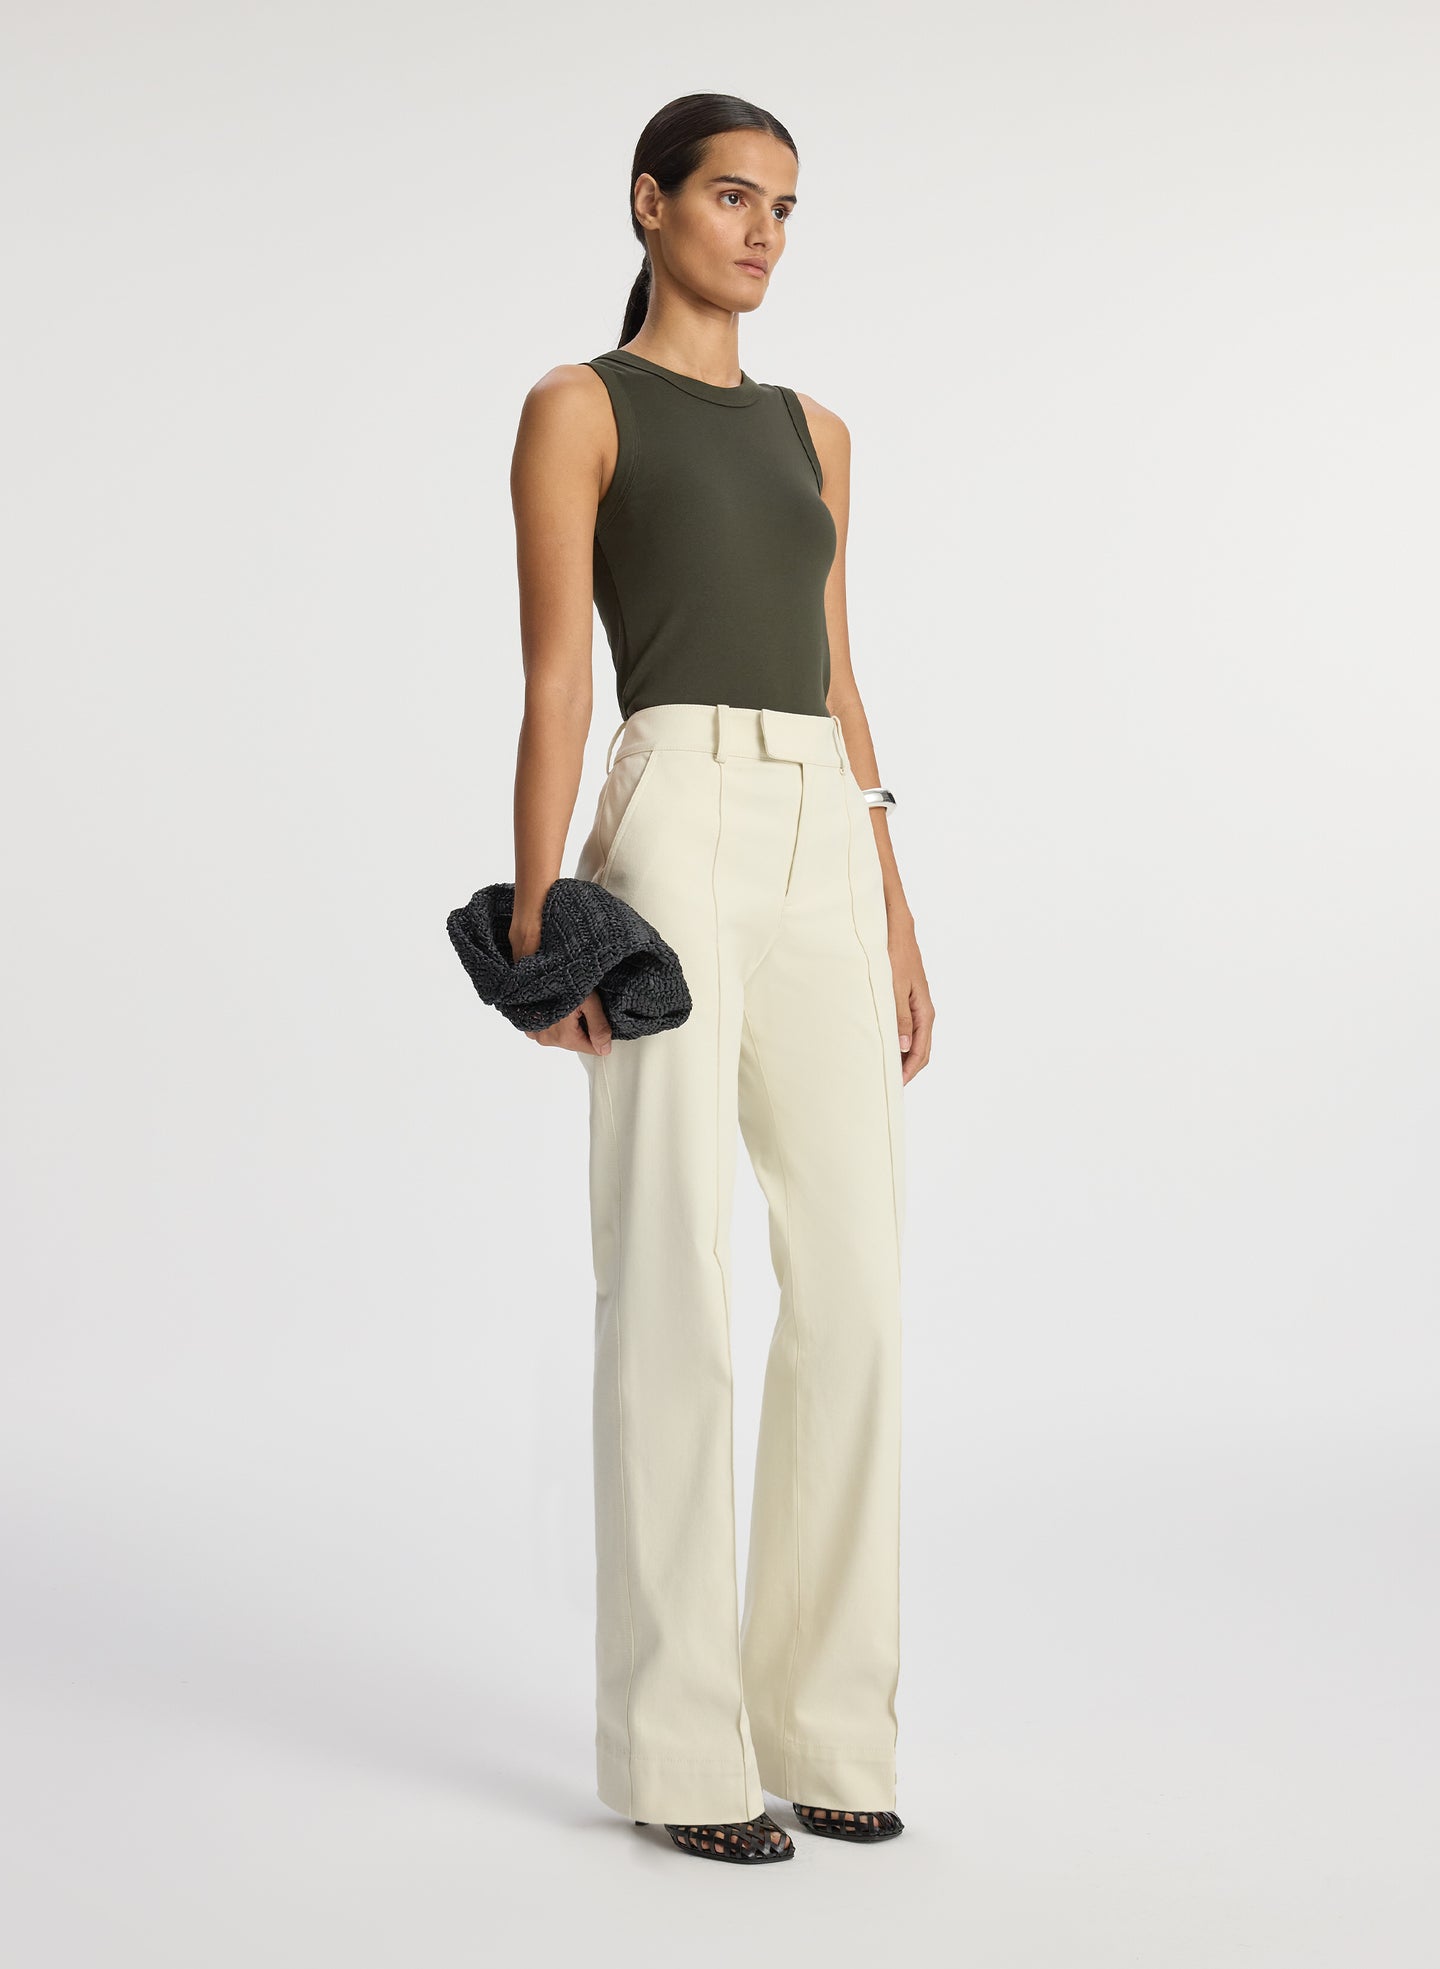 side view of woman wearing olive green sleeveless top with cream wide leg pants